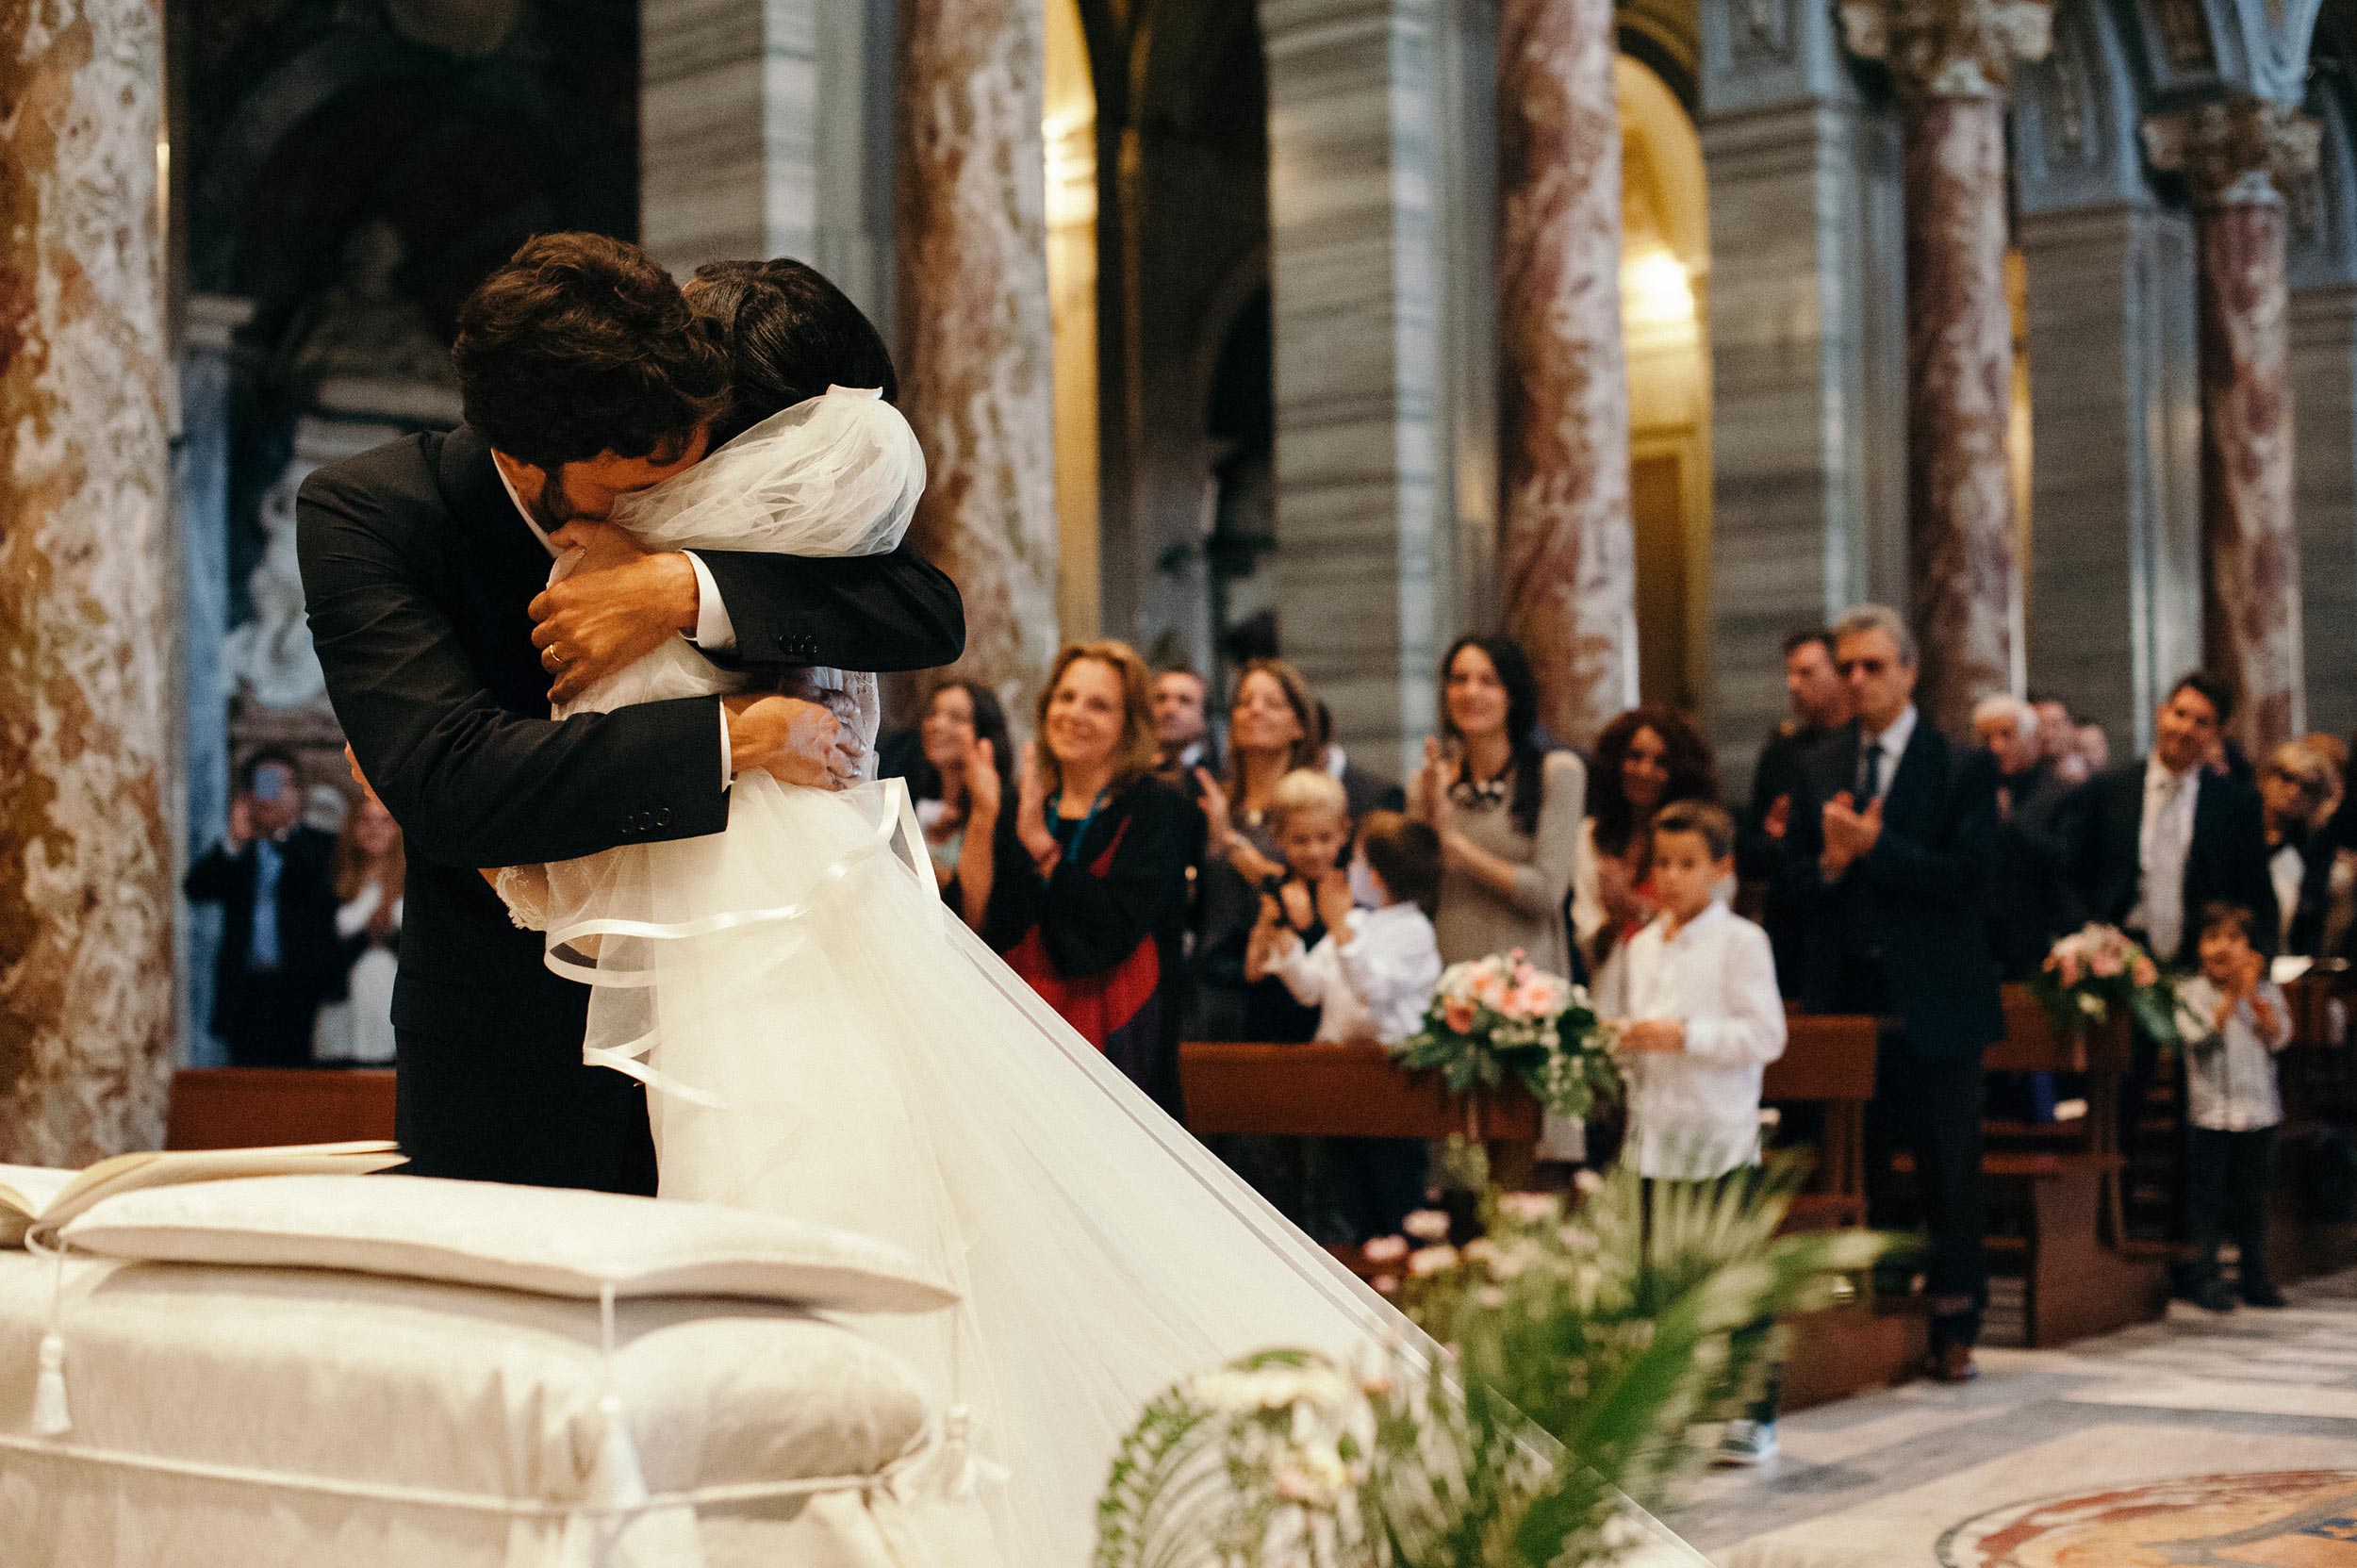 groom-hugs-the-bride-in-great-emotion-during-ceremony-wedding-in-rome-italy.jpg